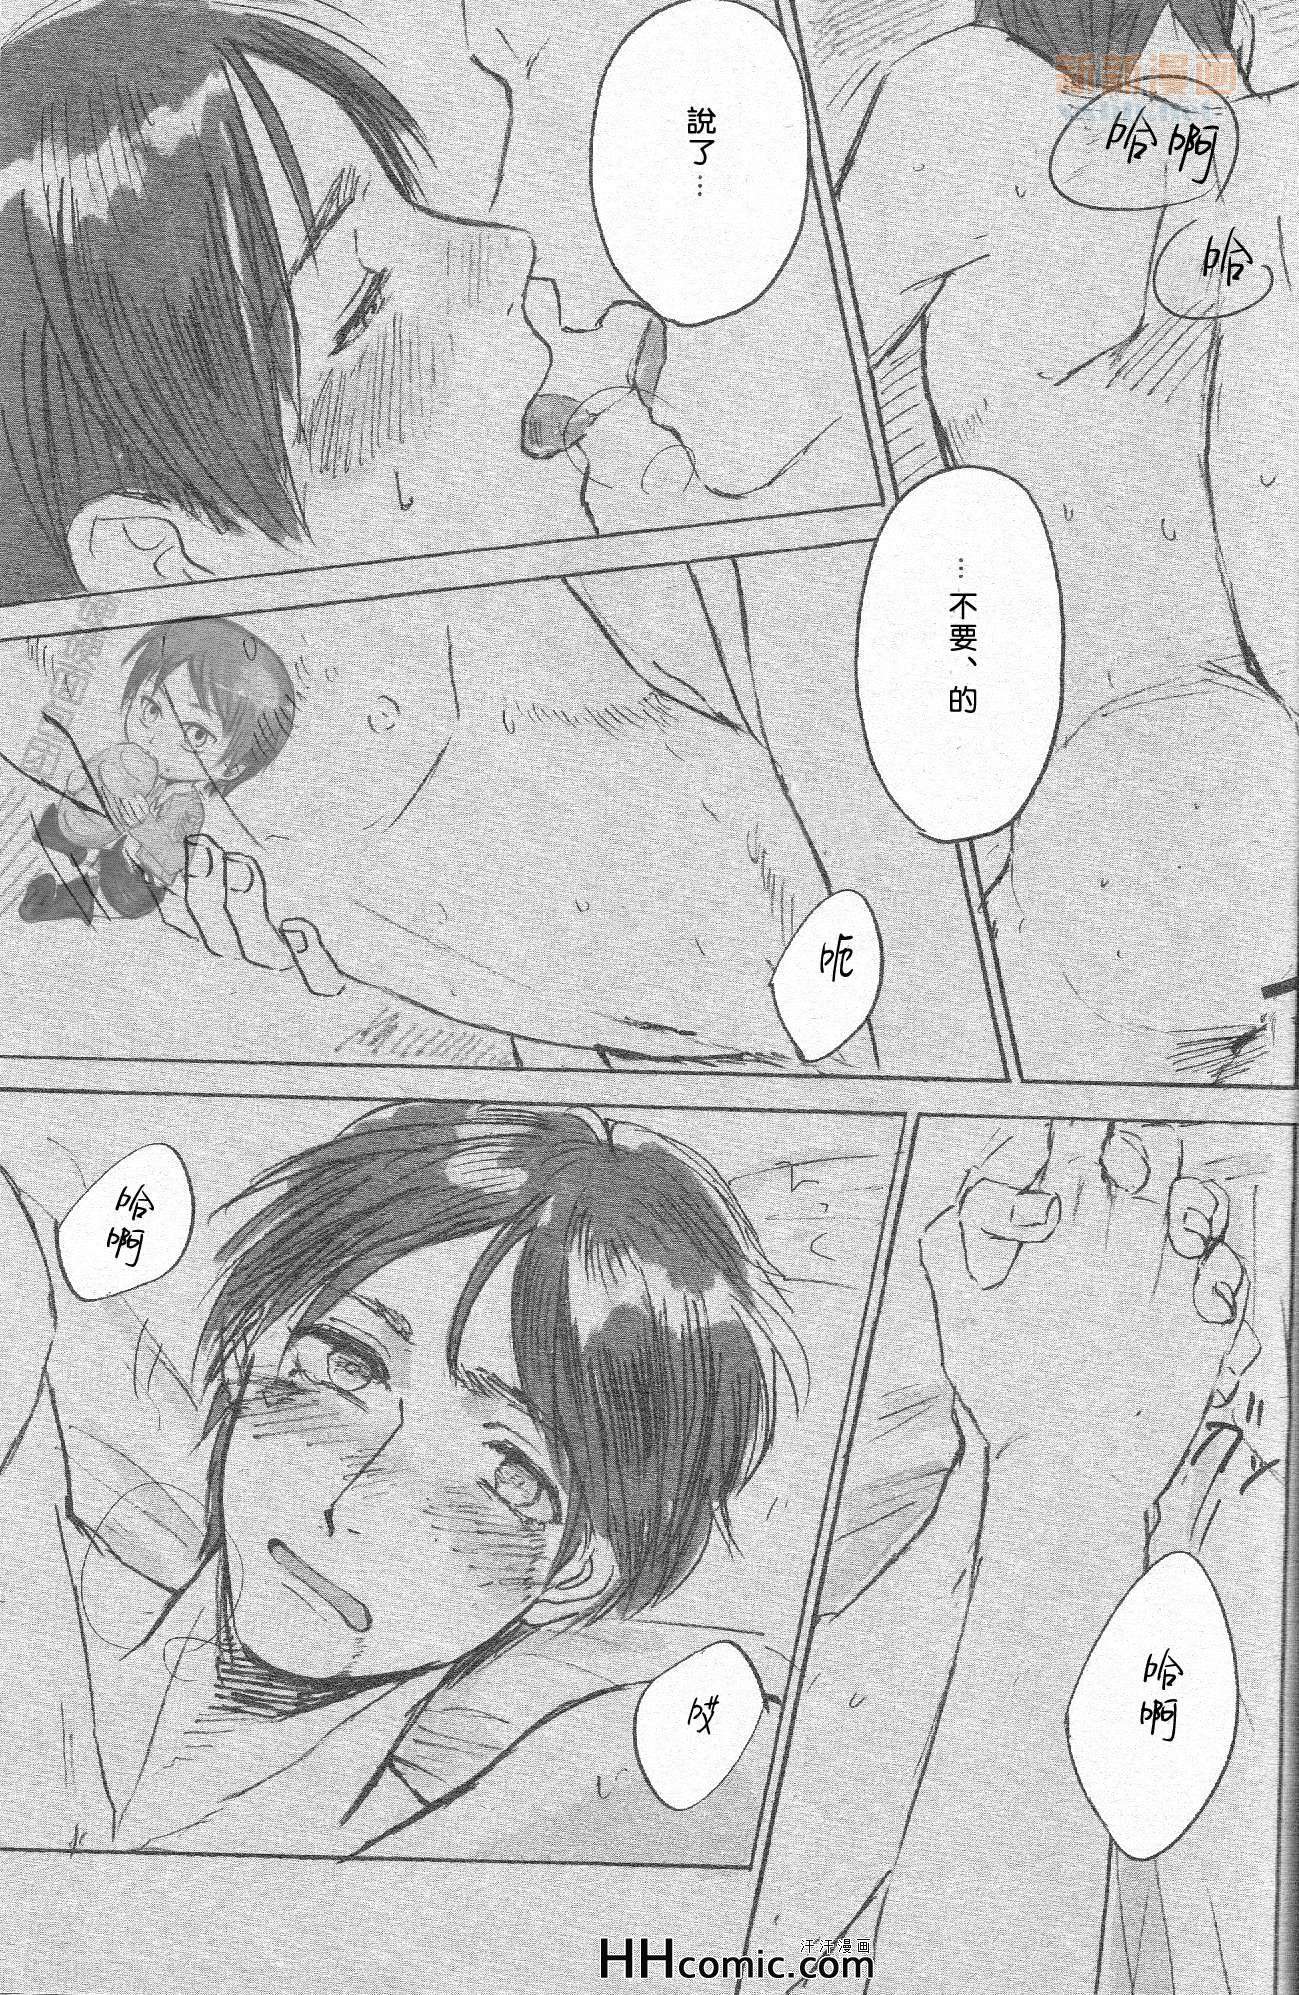 《a fat lot you know》漫画 01集